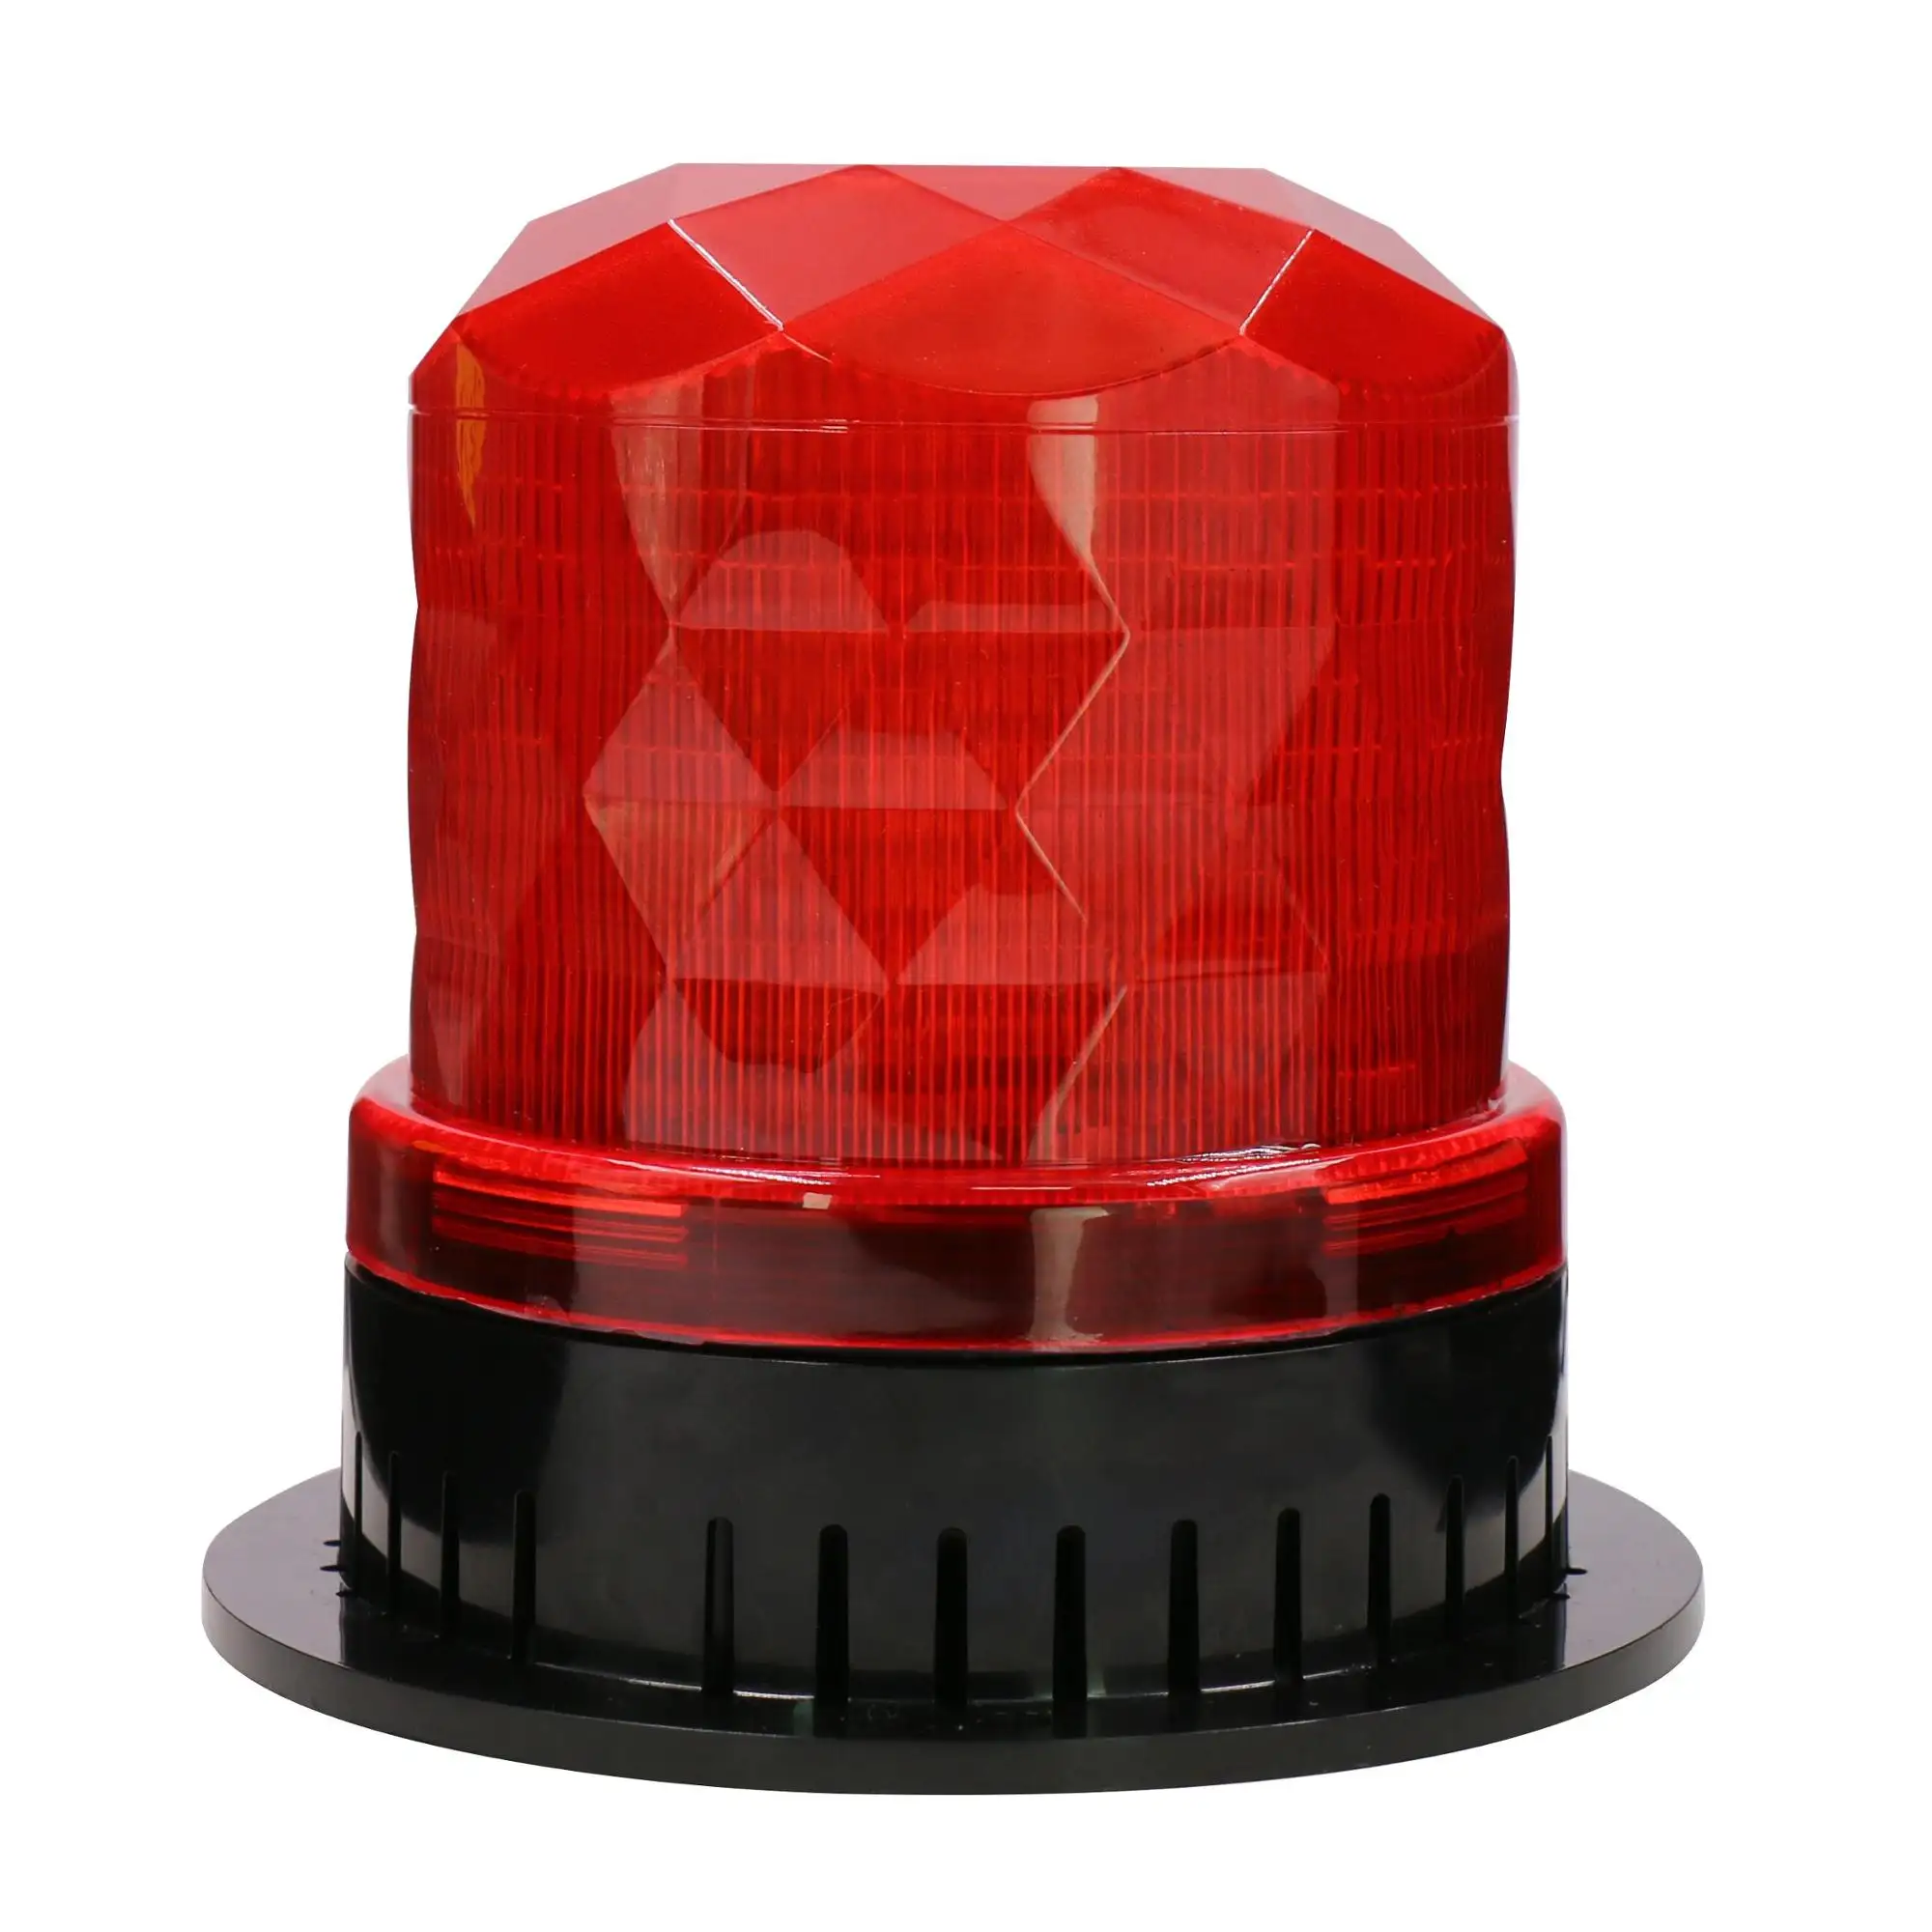 Factory IP65 Protect LED RED Flash Light 120db Voicev Warning Security Siren Alarm